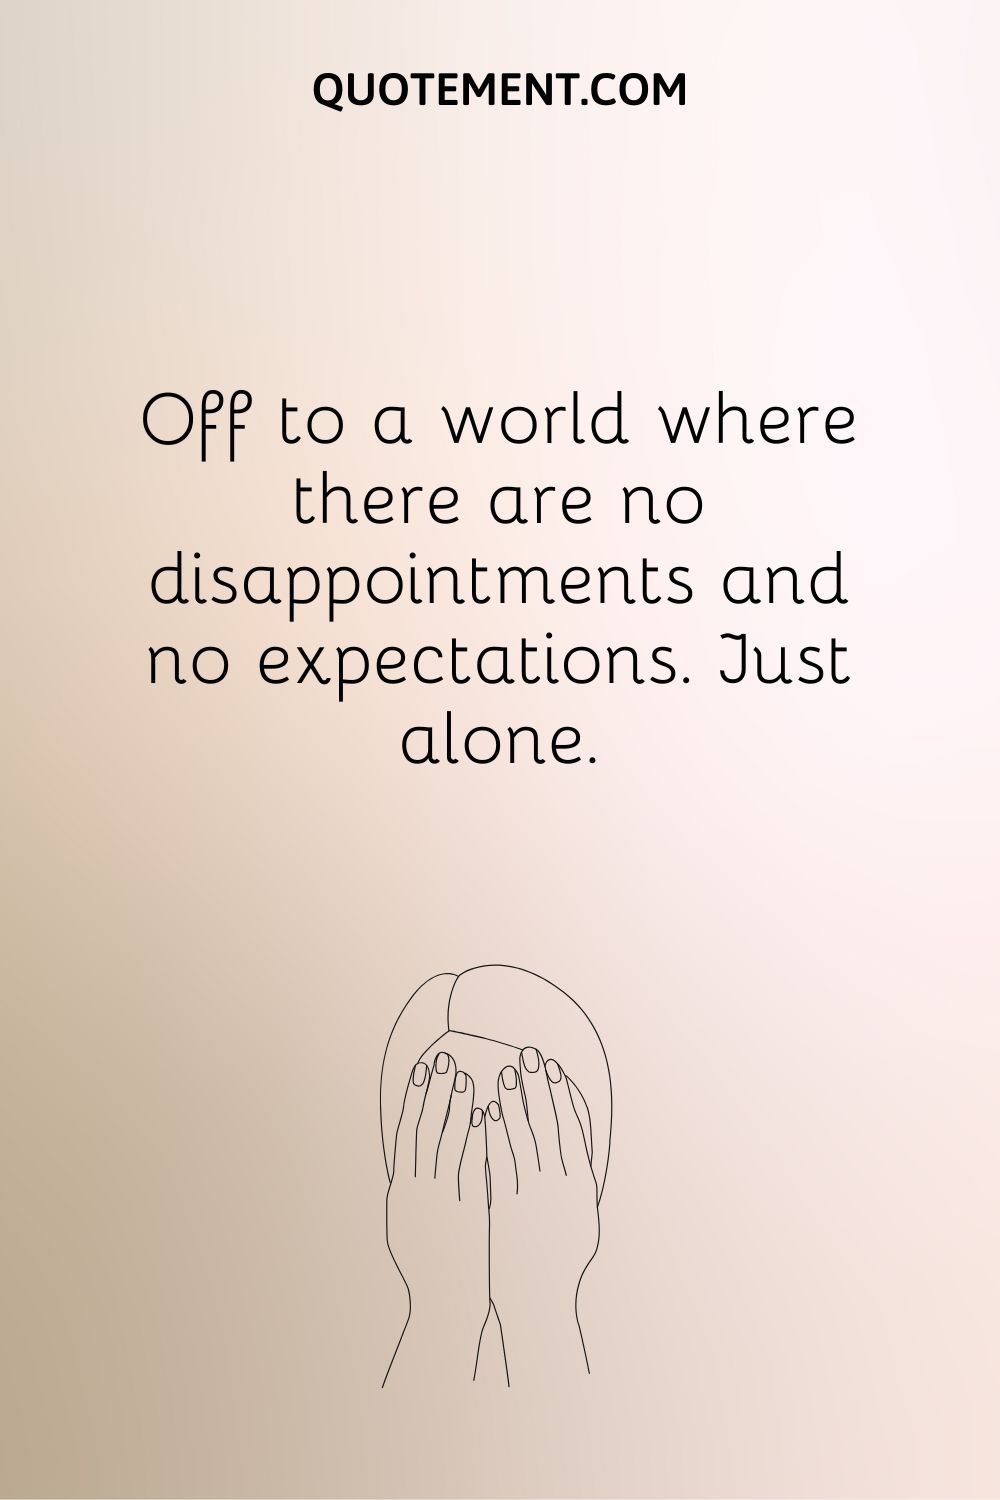 Off to a world where there are no disappointments and no expectations. Just alone.